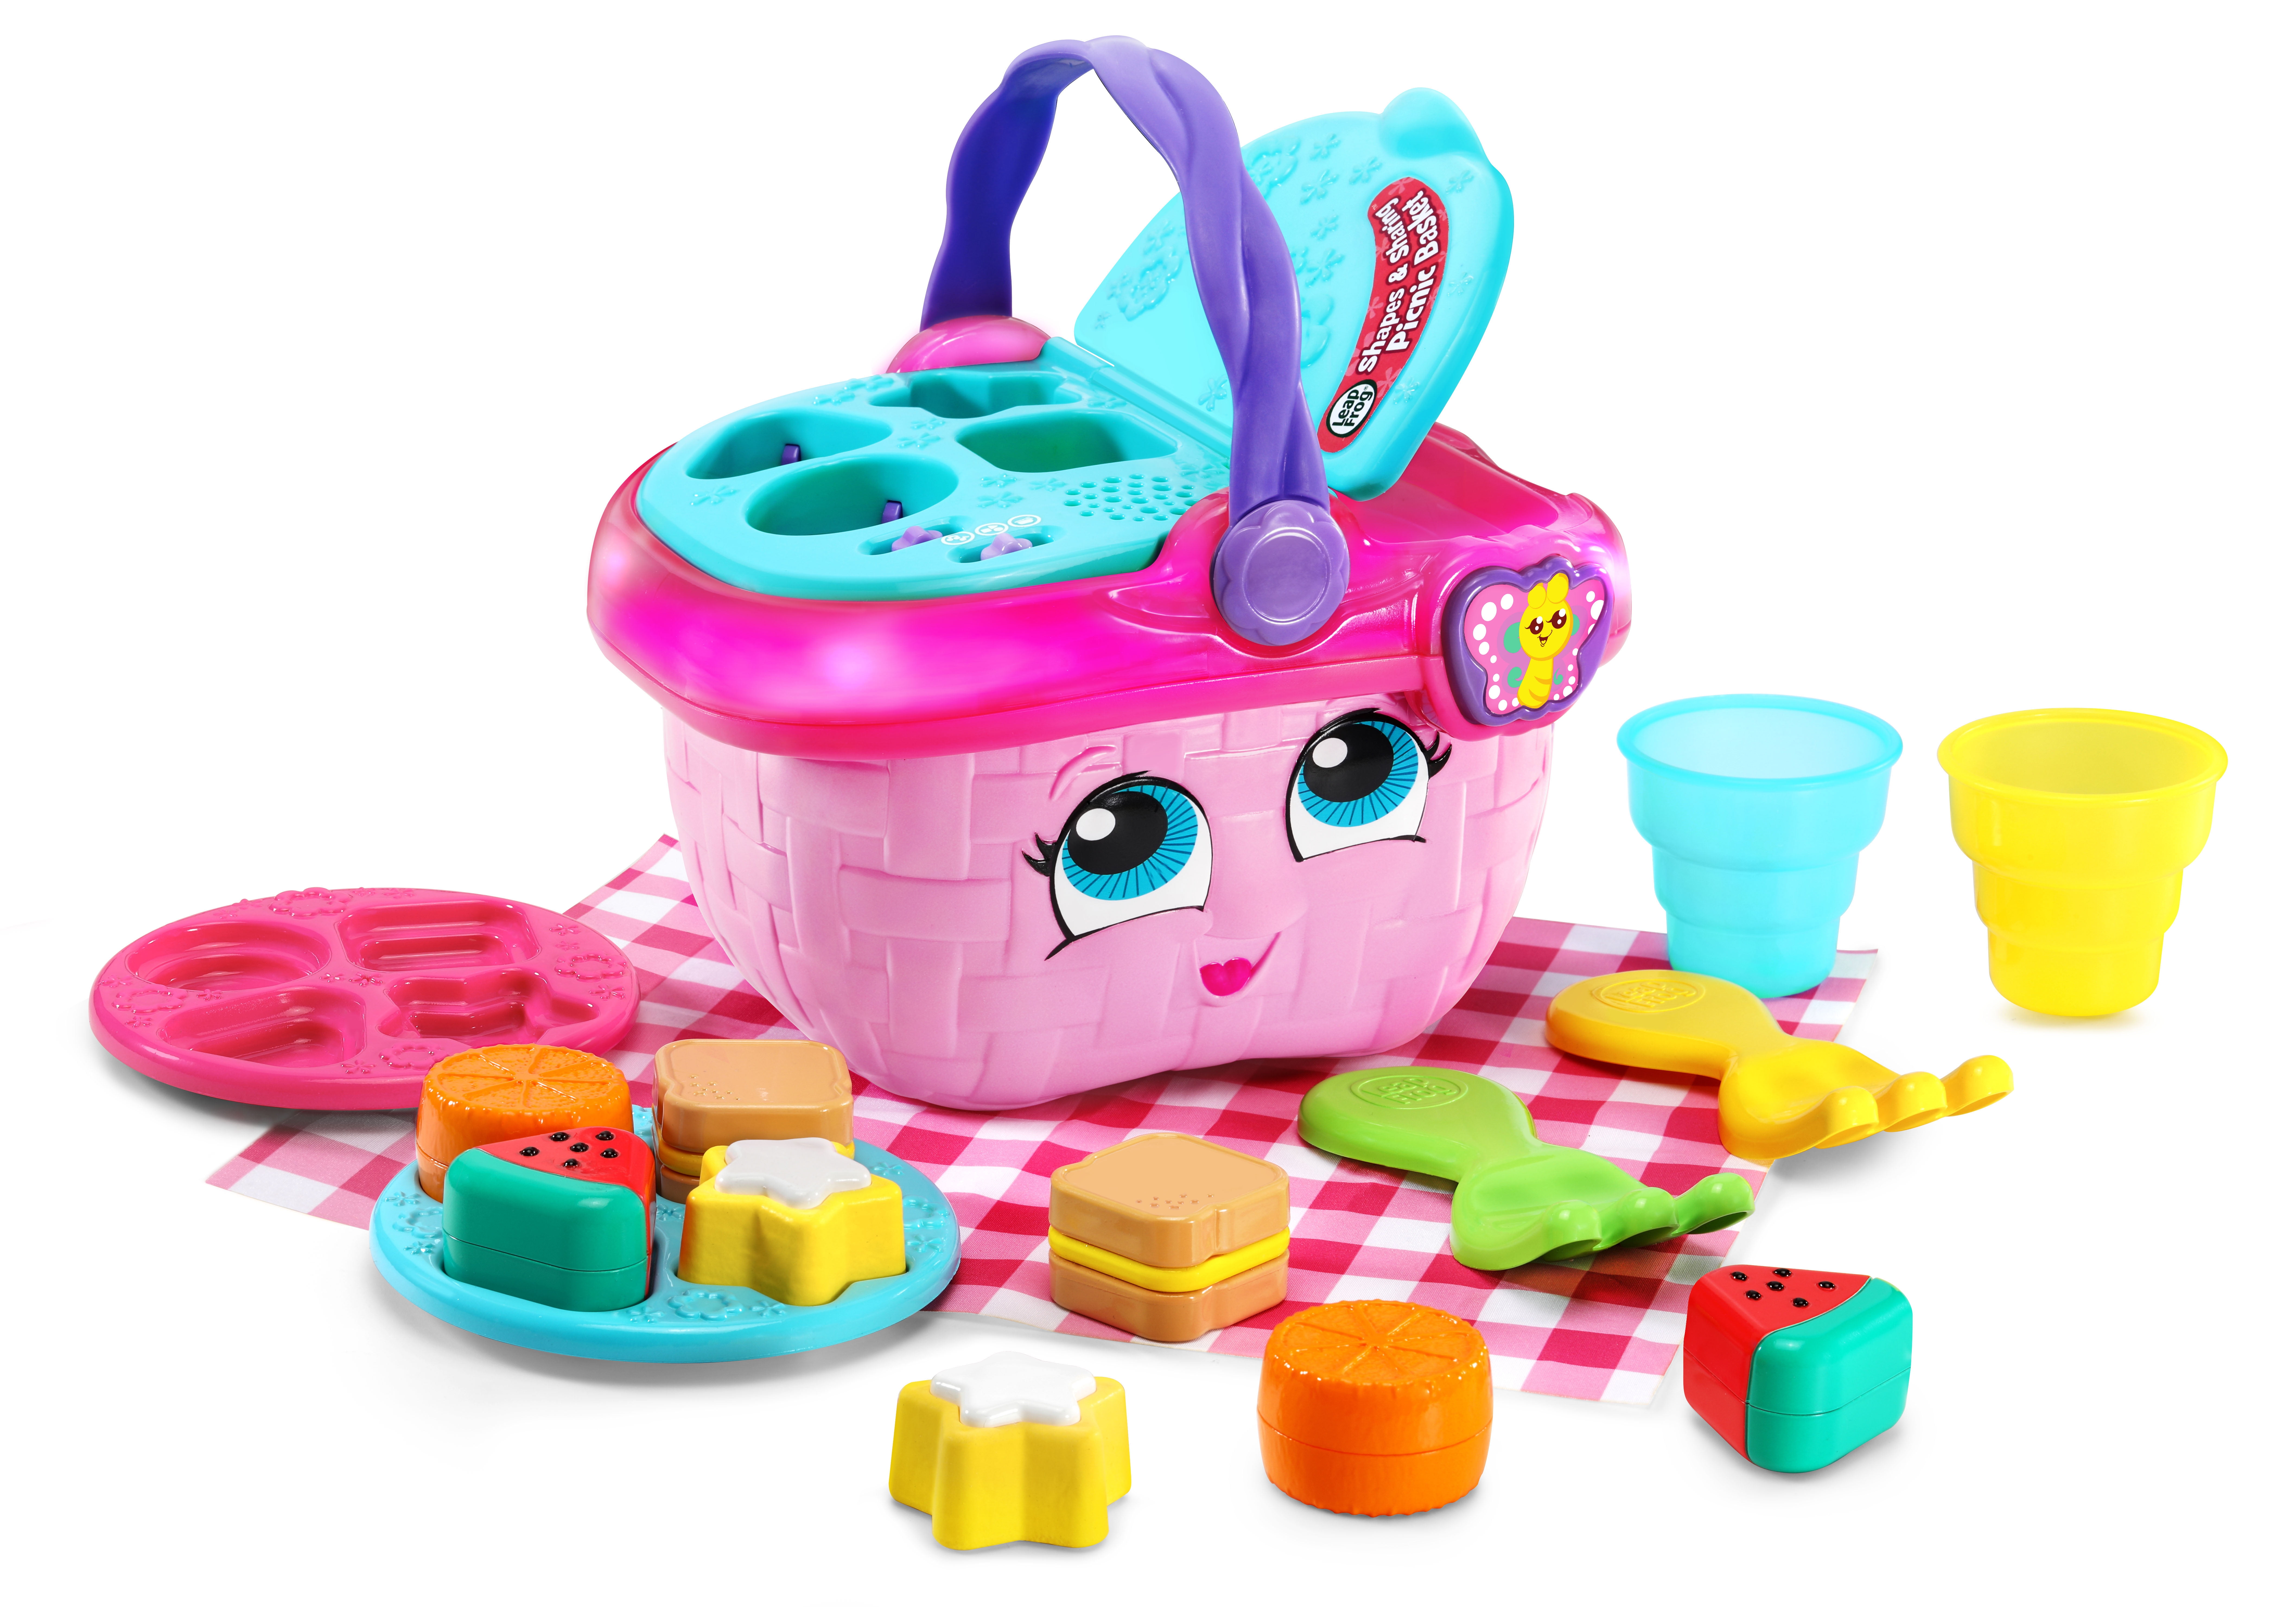 LeapFrog Shapes and Sharing Picnic Basket, Role Play Toy for Infants